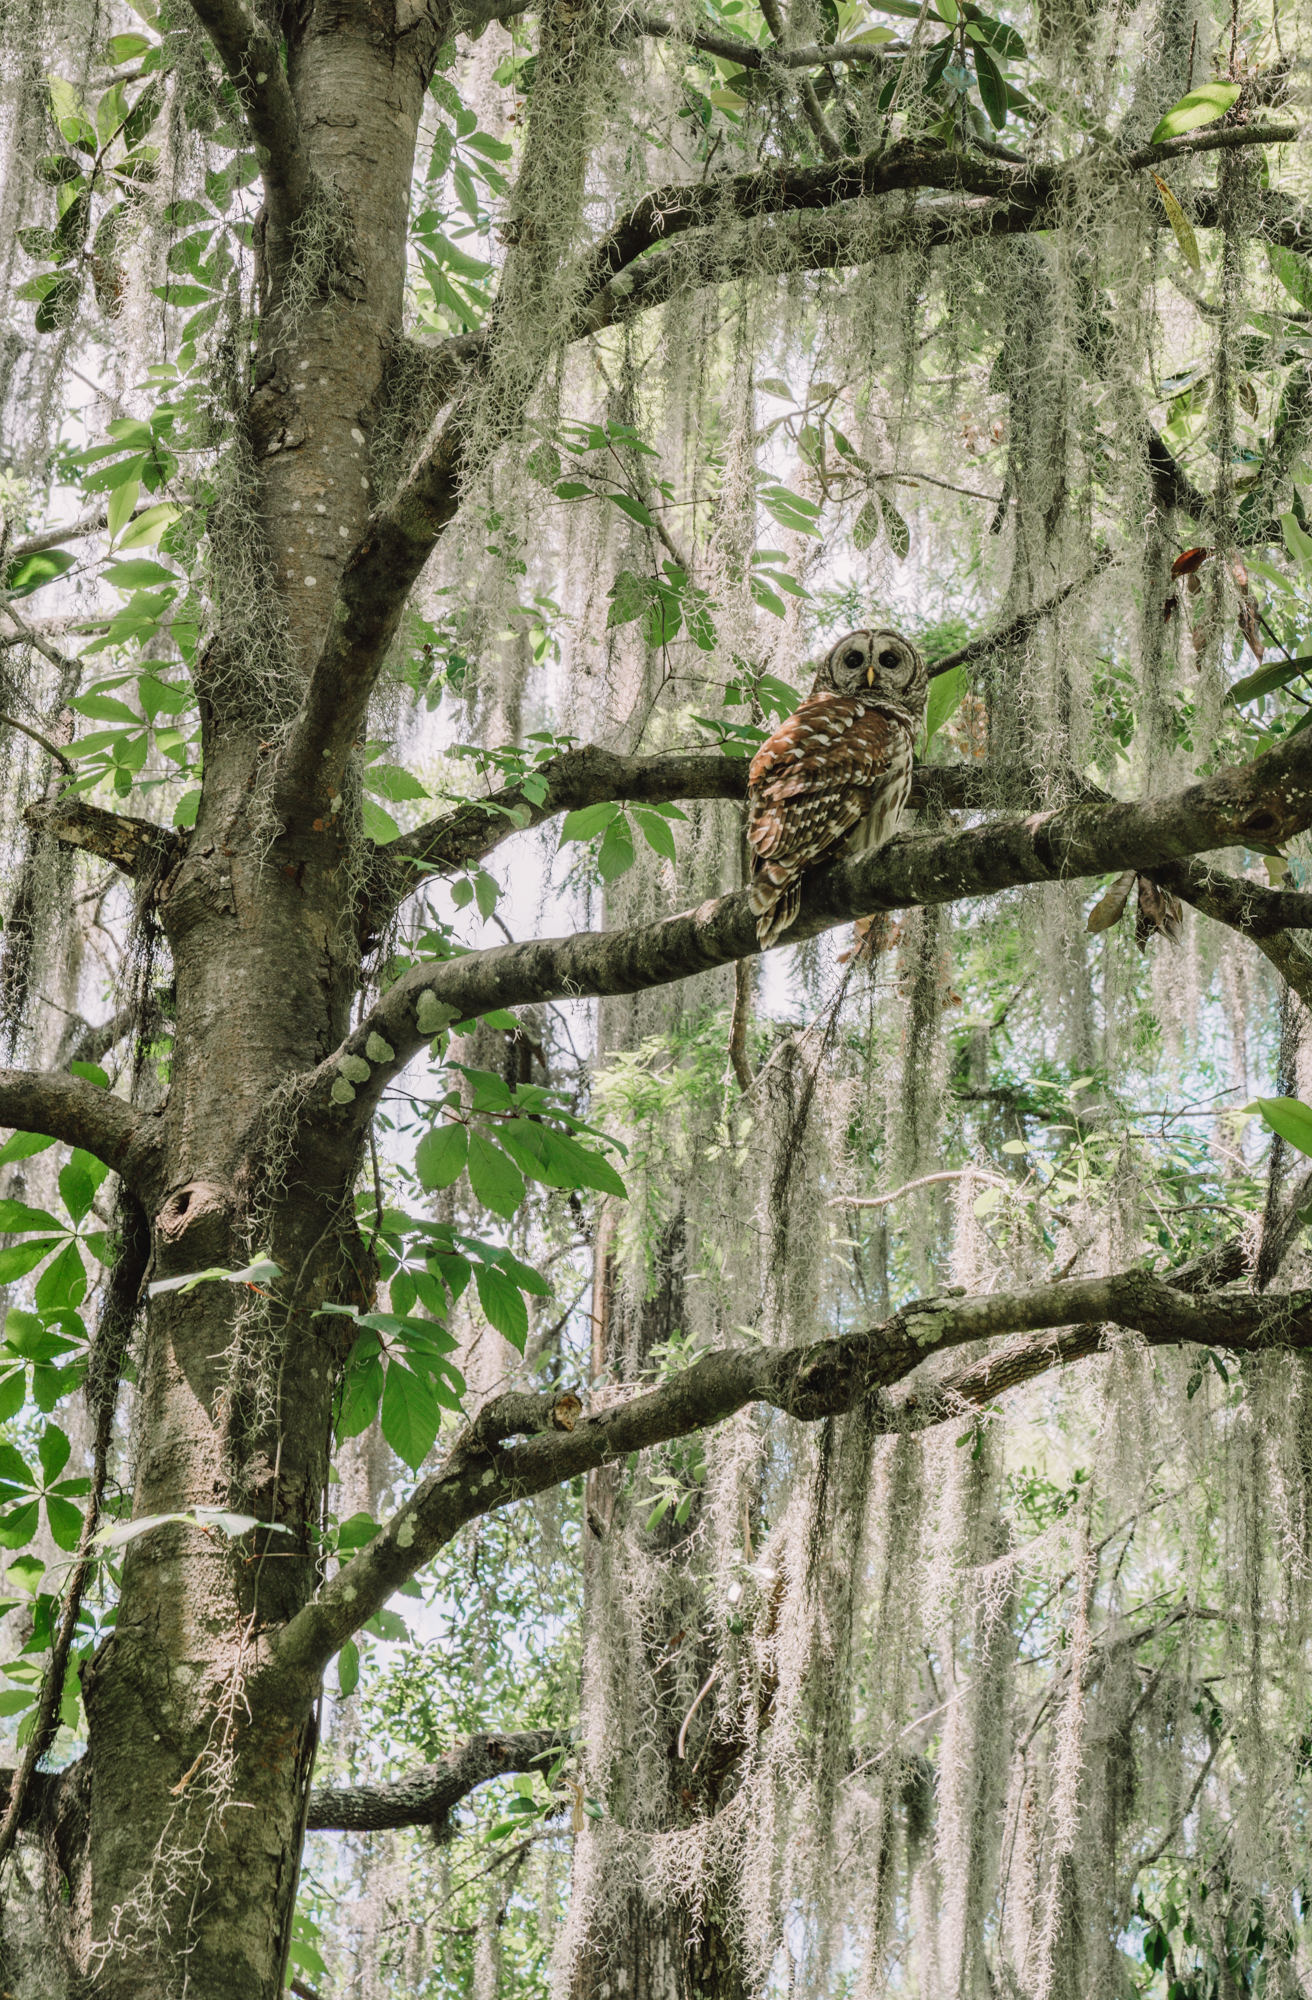 Things to do in charleston sc with kids - a big barn owl looks down from a tree covered in spanish moss. 